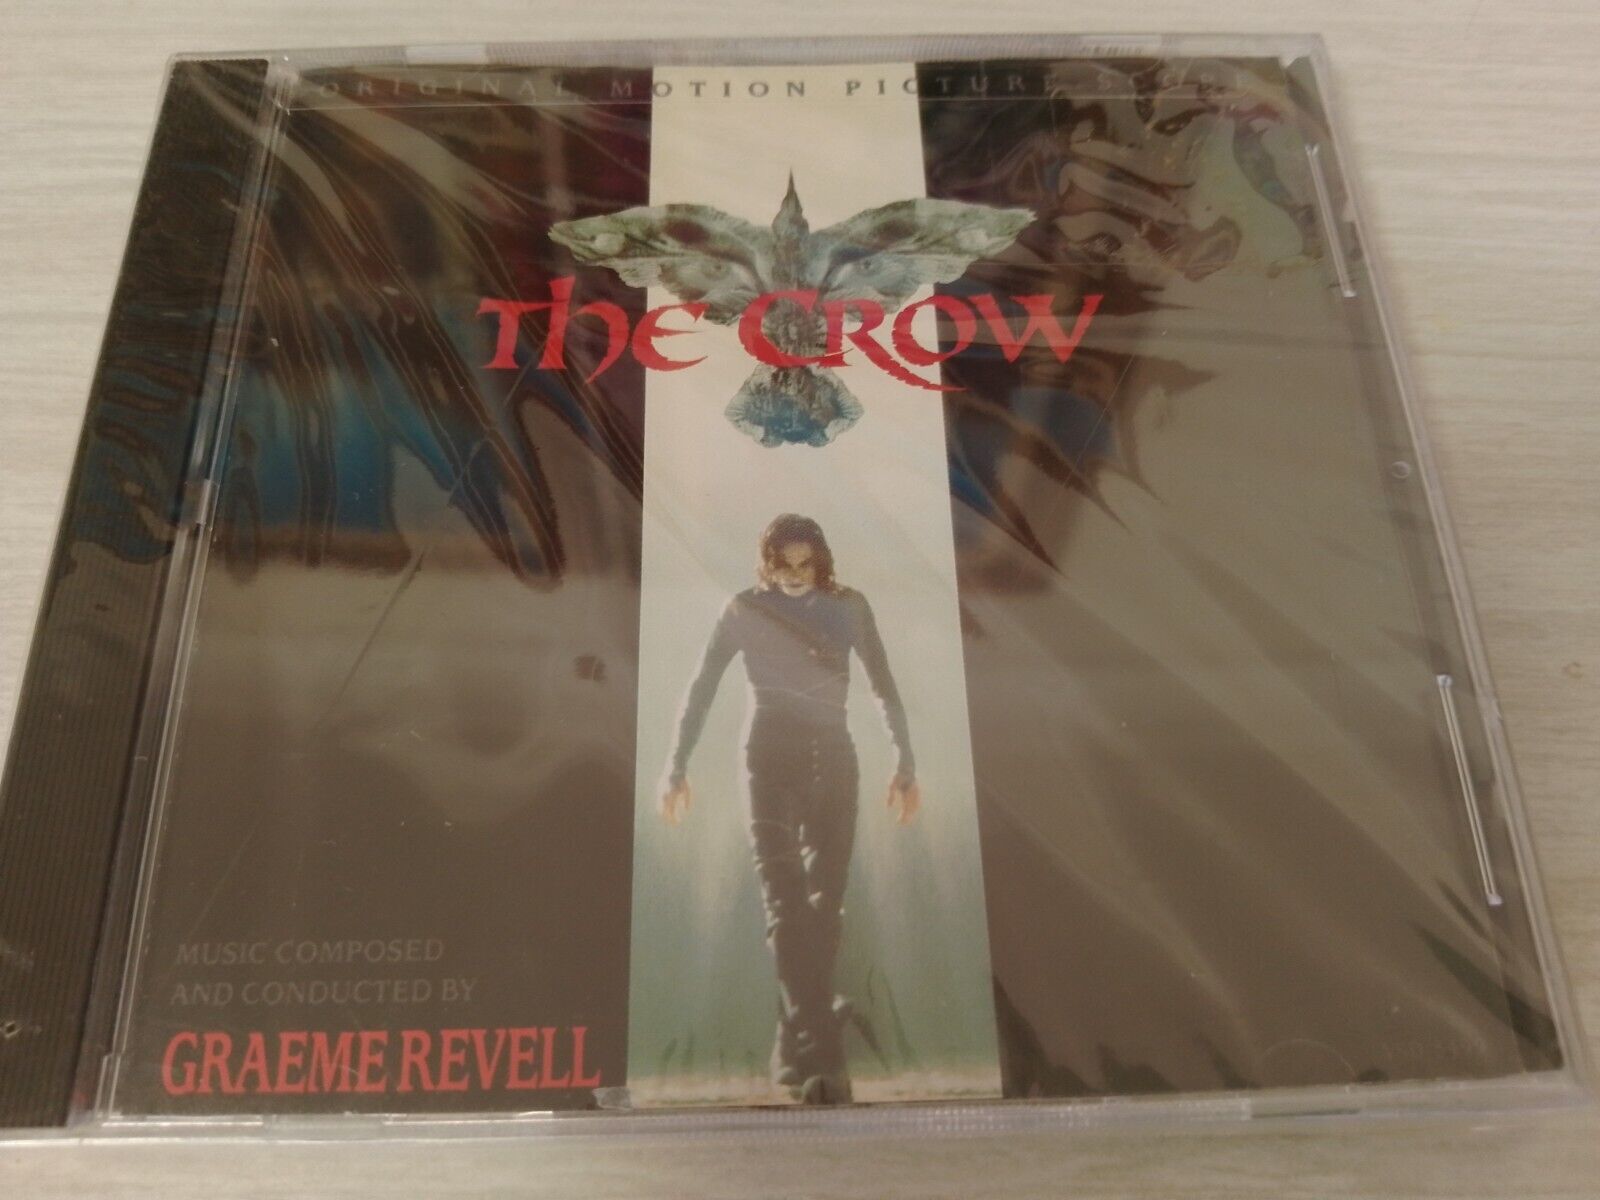 The Crow - Original Motion Picture Score. New In Original Packaging